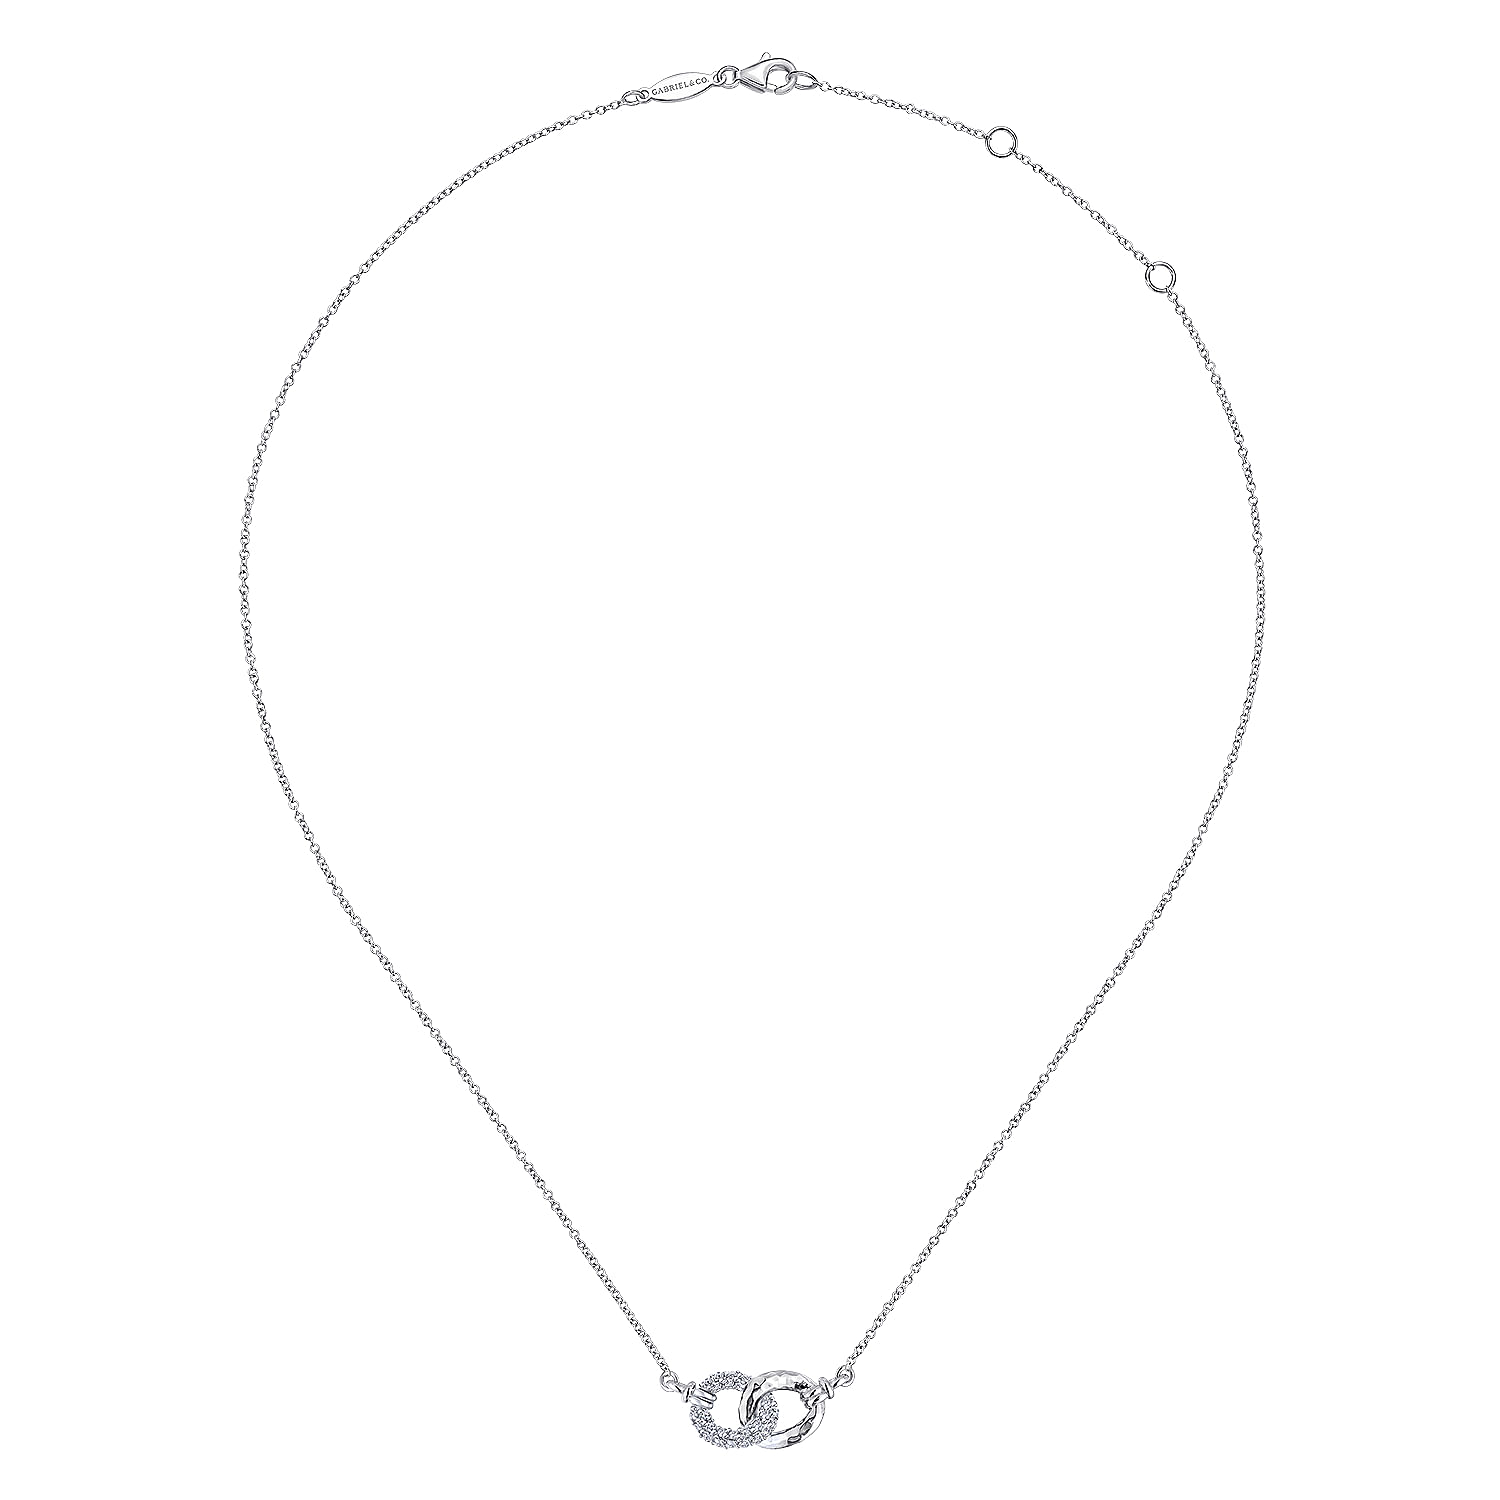 Sterling Silver and White Sapphire Interlocking Links Necklace